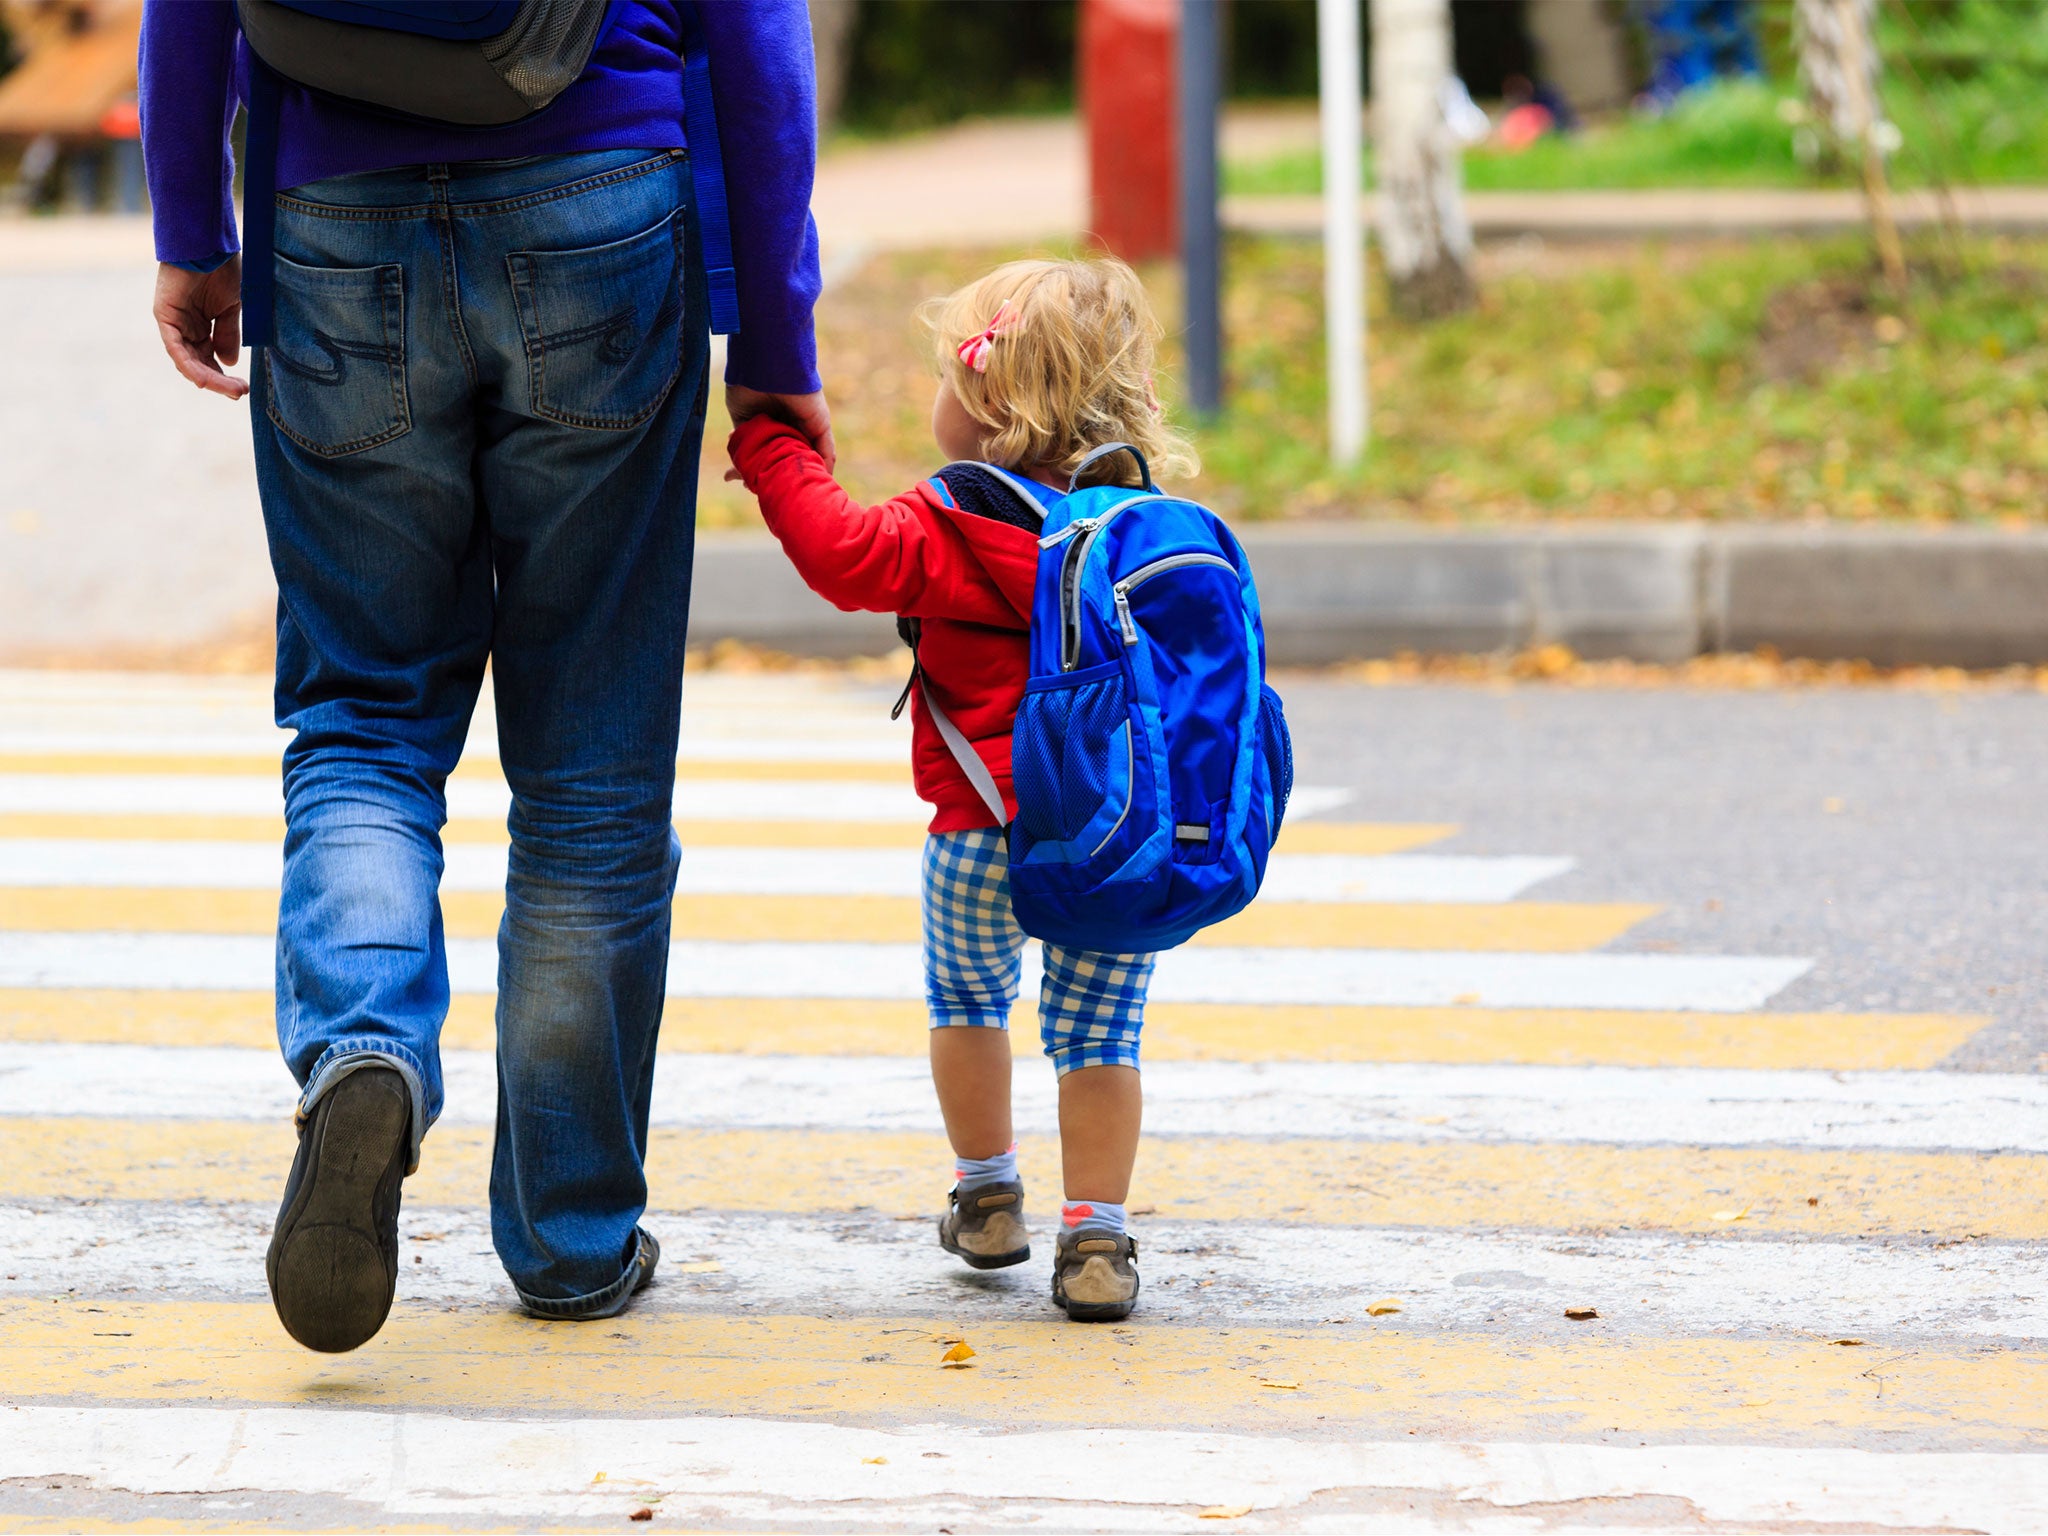 Up to 30 per cent of children are starting school with symptoms typically associated with dyslexia, dyspraxia, and ADHD – conditions which can be improved with the correct levels of physical activity, according to researchers